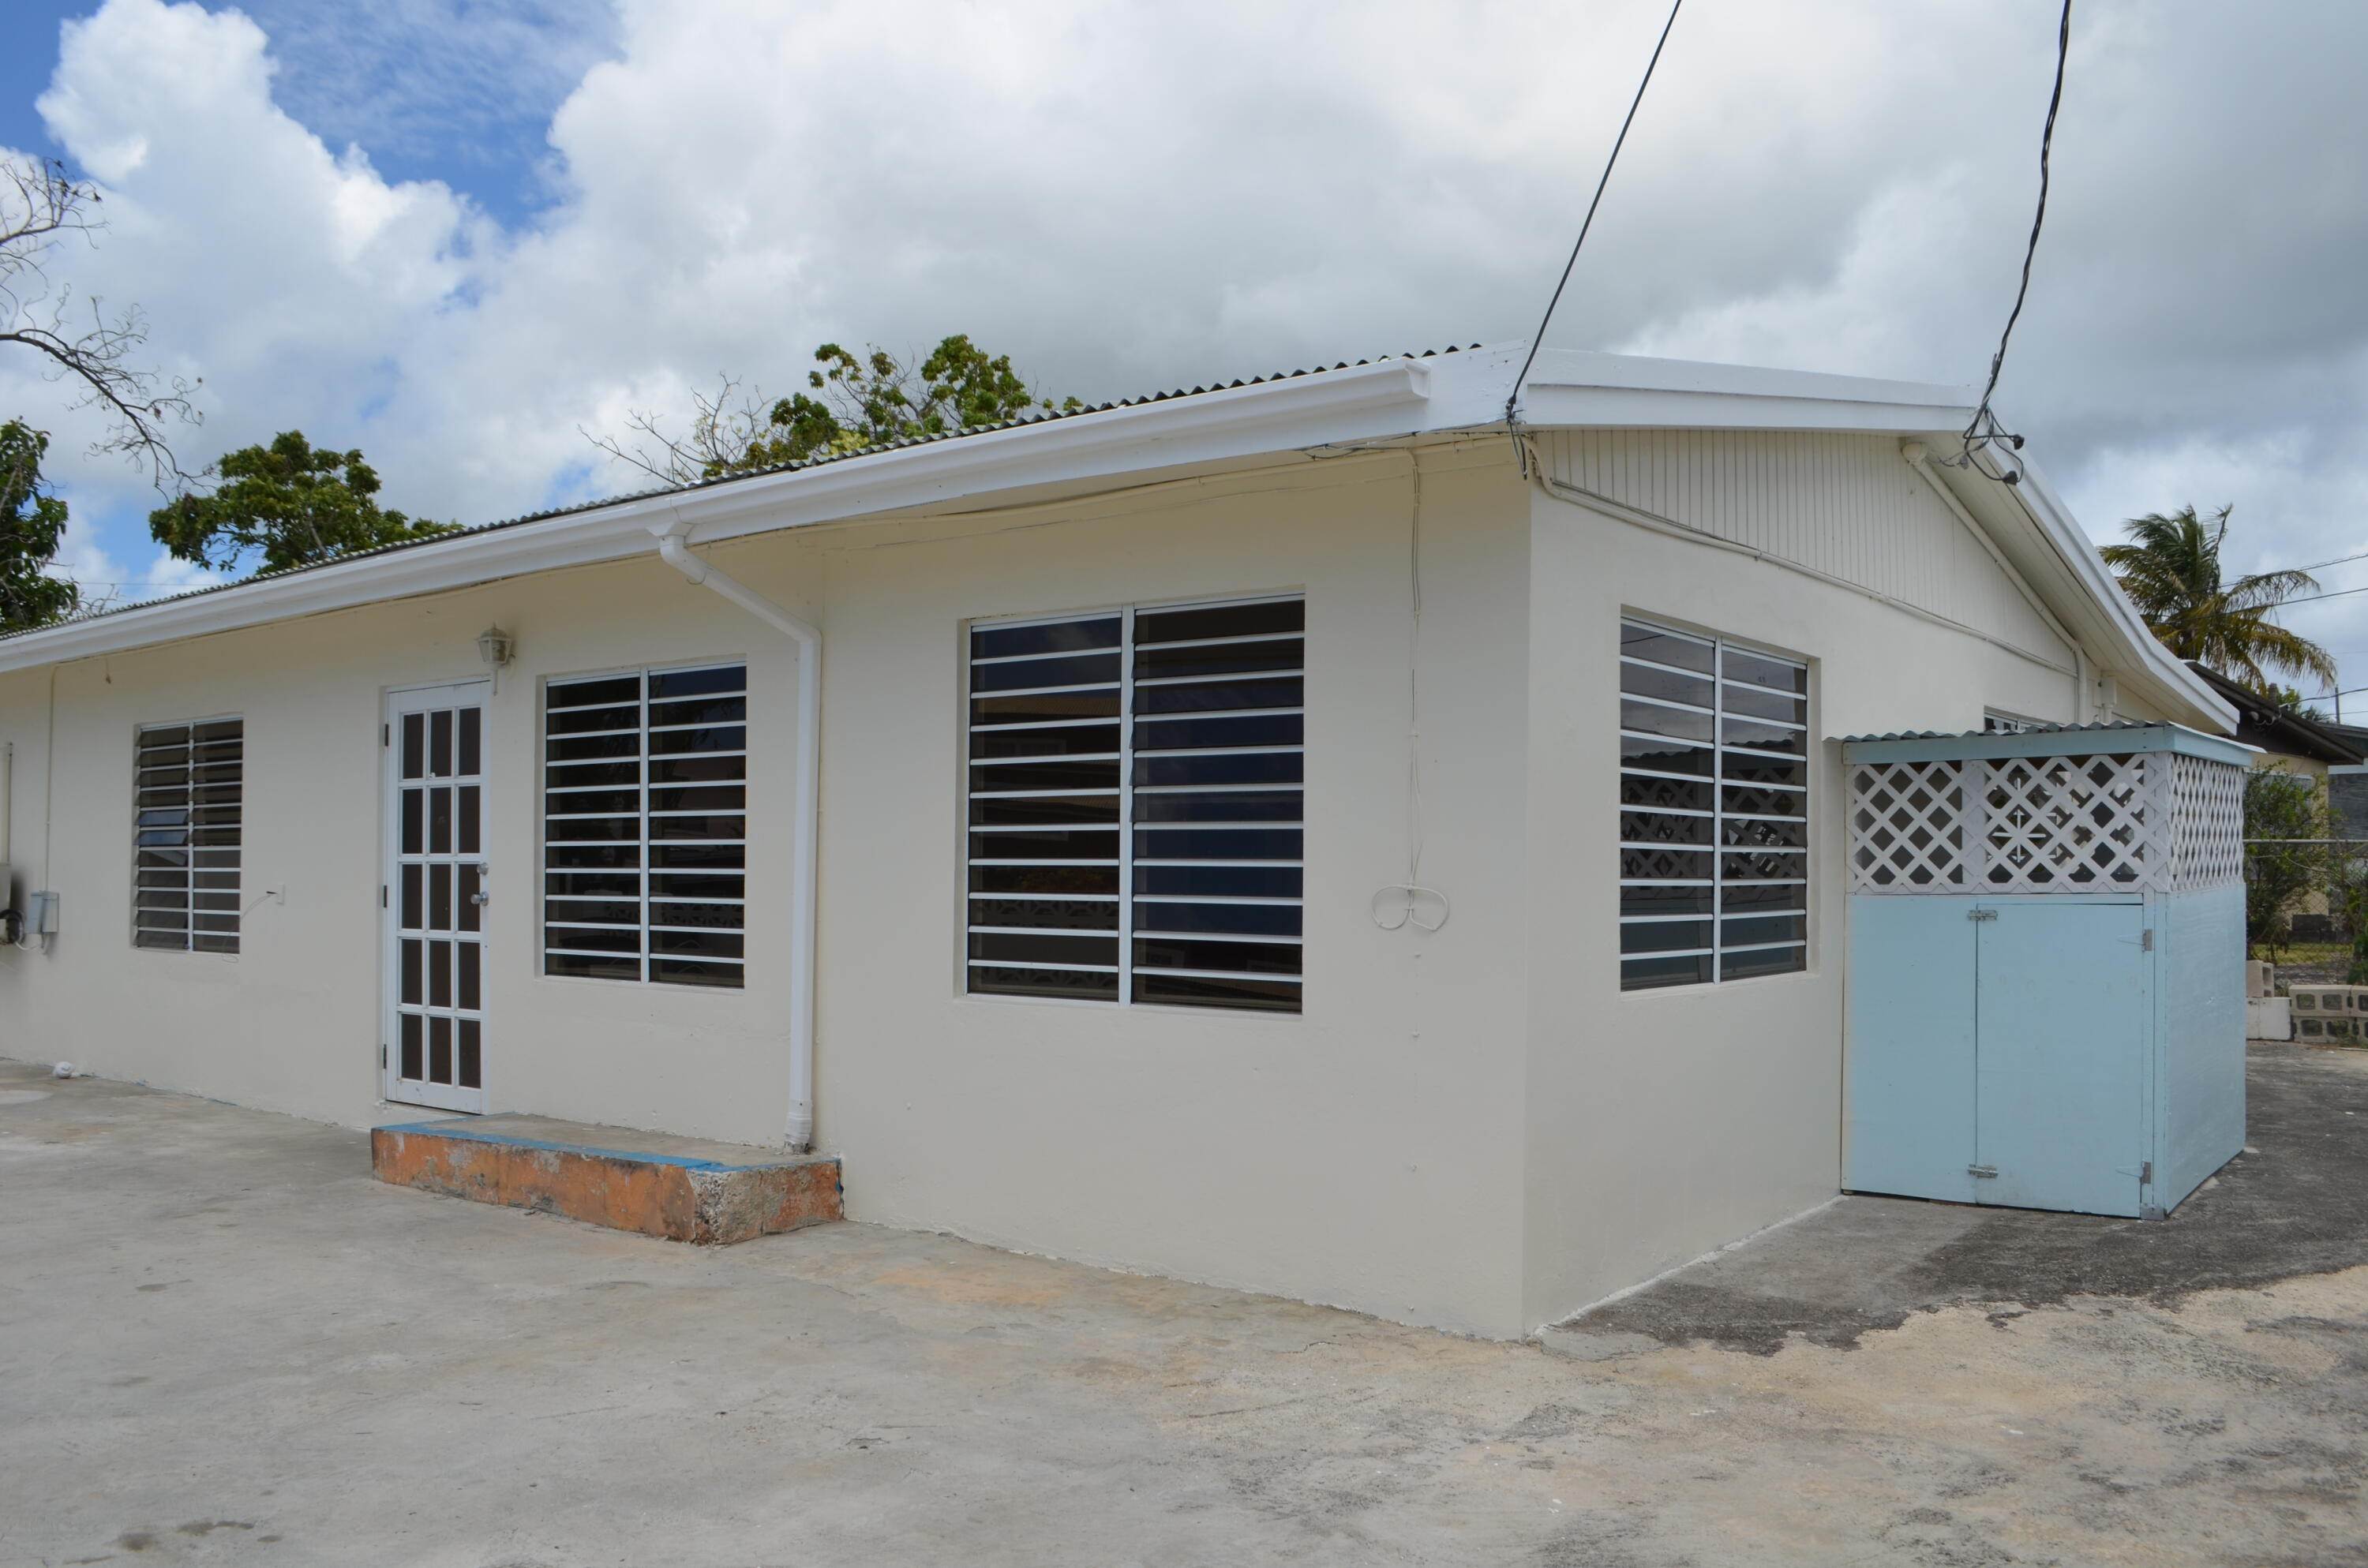 31. Single Family Homes for Sale at 97 Strawberry Hill QU St Croix, Virgin Islands 00820 United States Virgin Islands